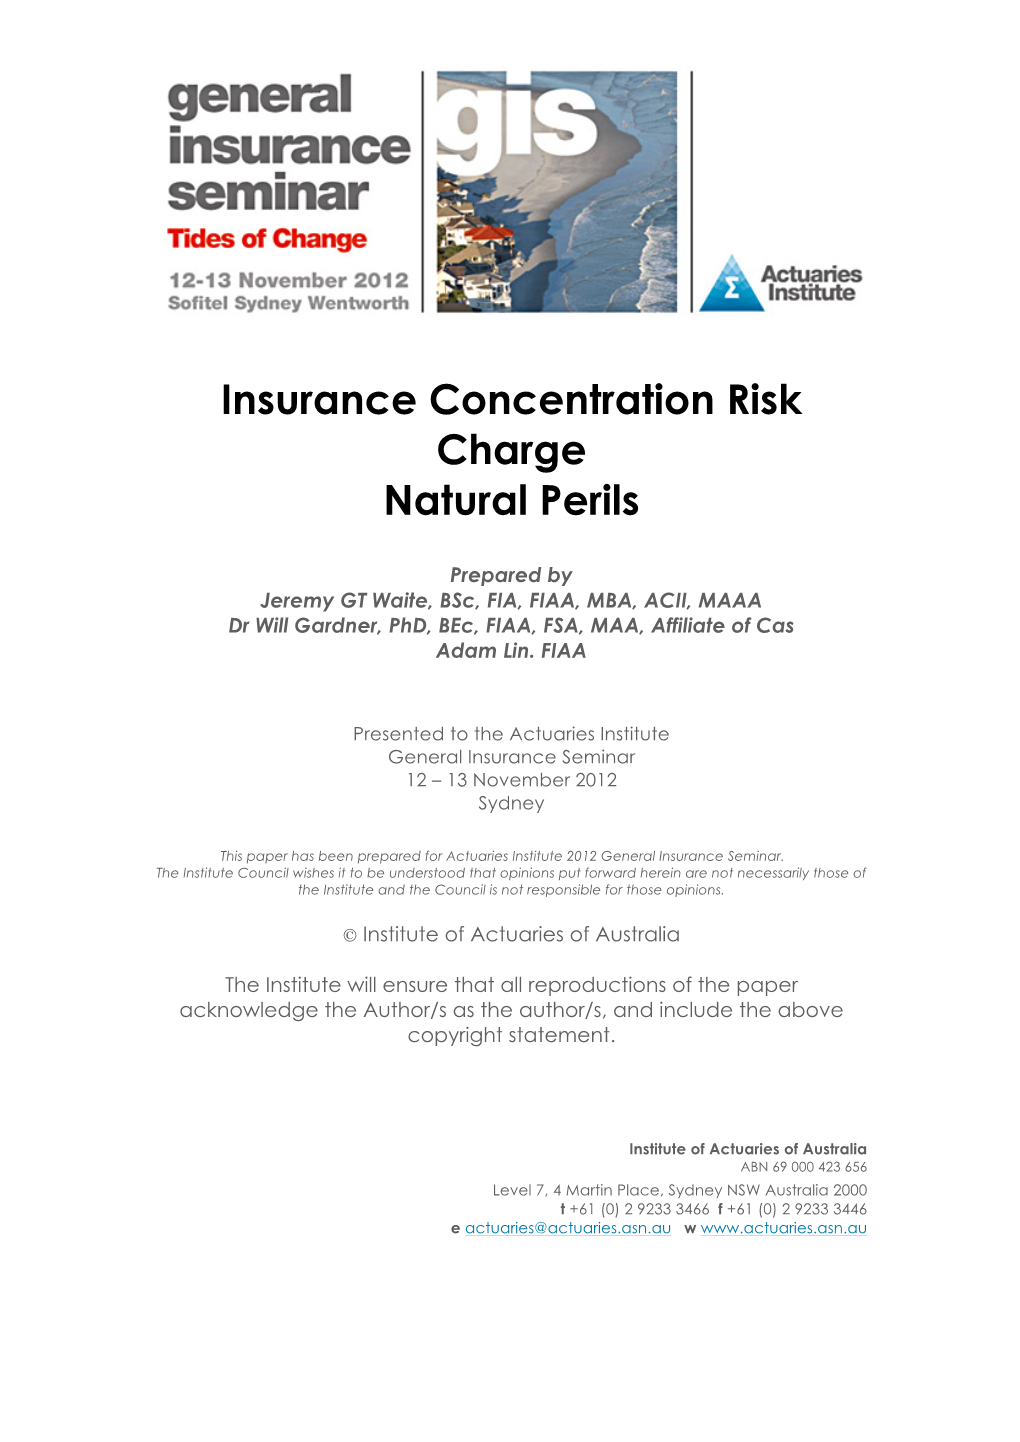 Insurance Concentration Risk Charge Natural Perils